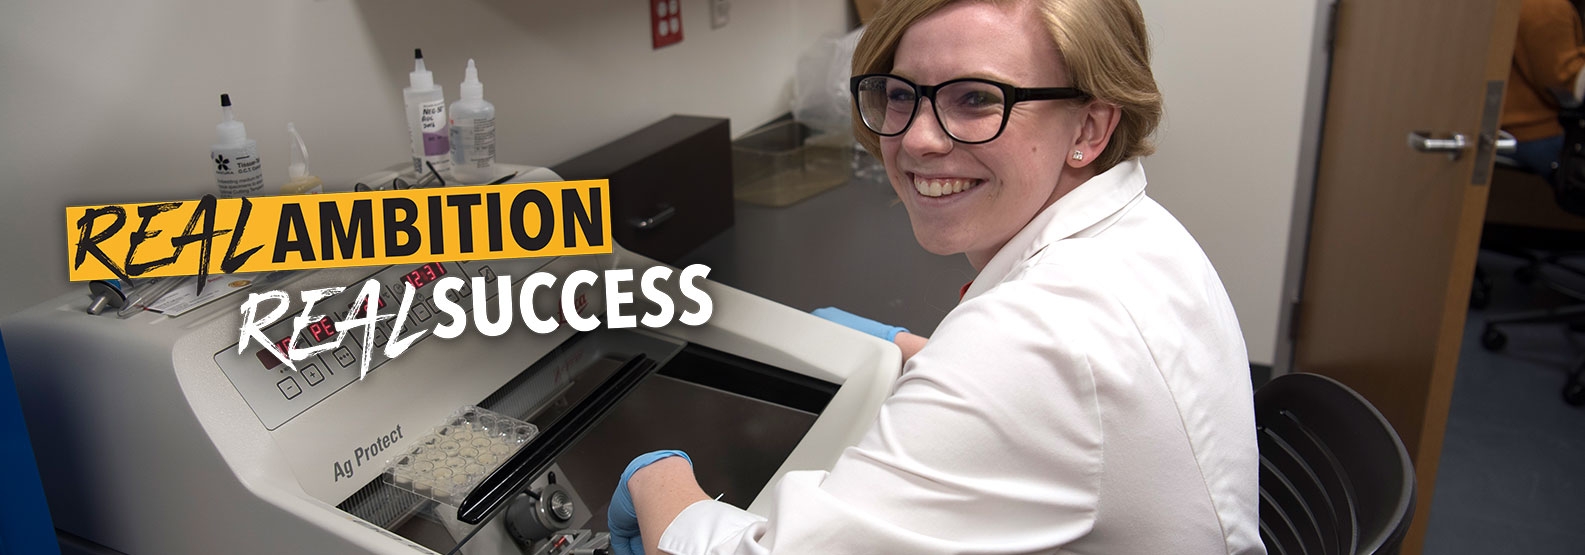 Female student in a lab coat smiling and she works with a Cryostat machine.